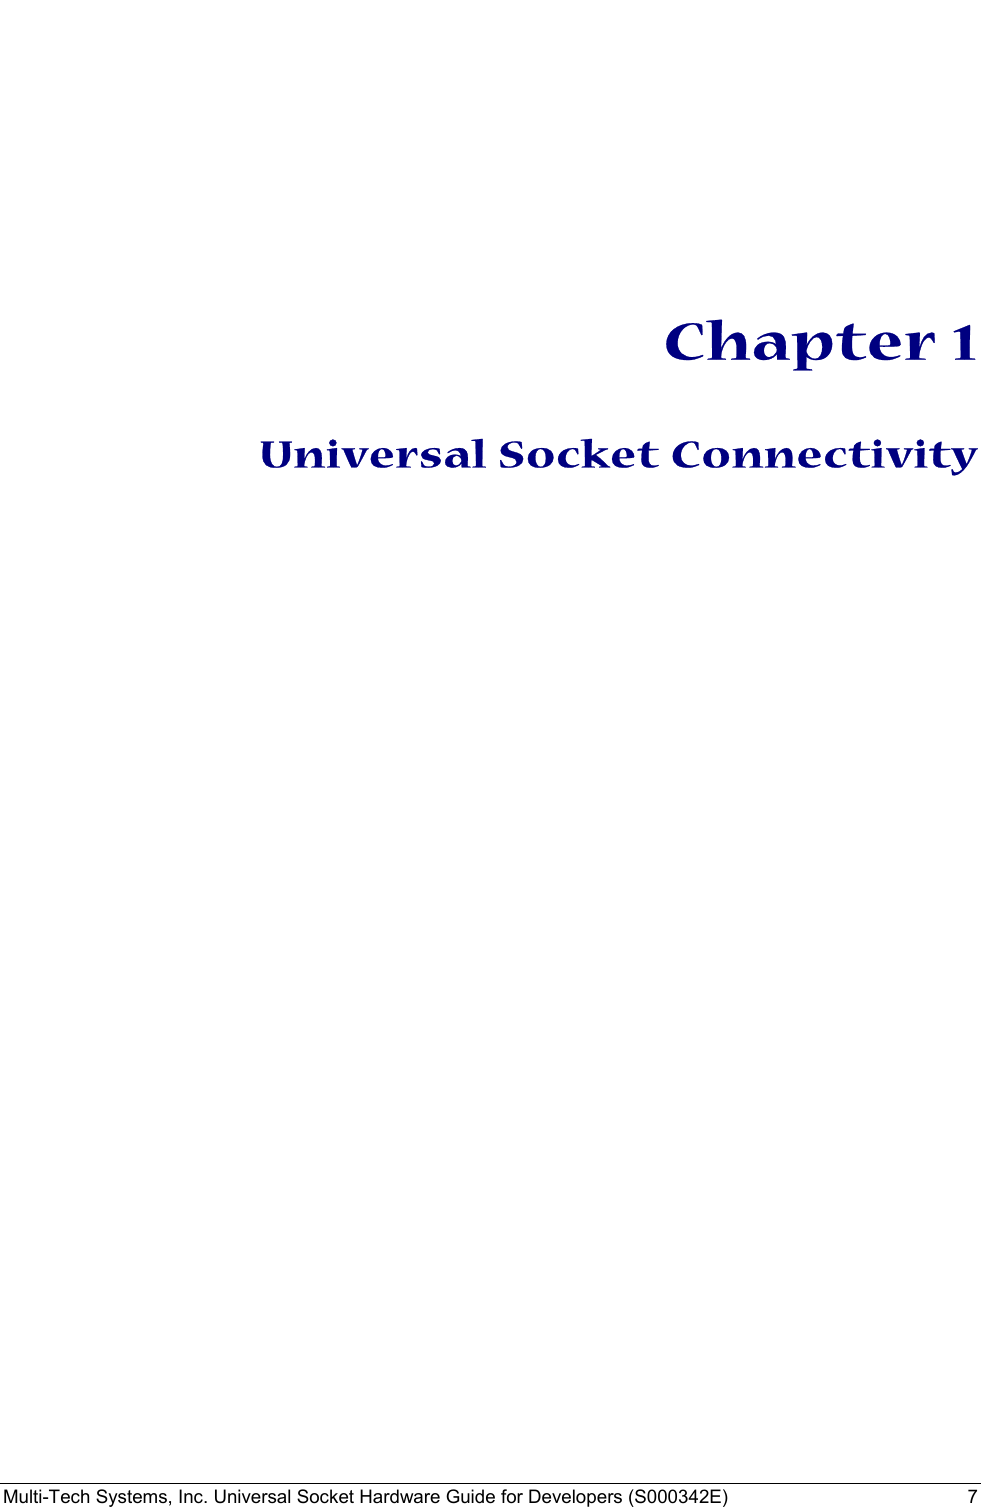  Multi-Tech Systems, Inc. Universal Socket Hardware Guide for Developers (S000342E)  7               Chapter 1  Universal Socket Connectivity  